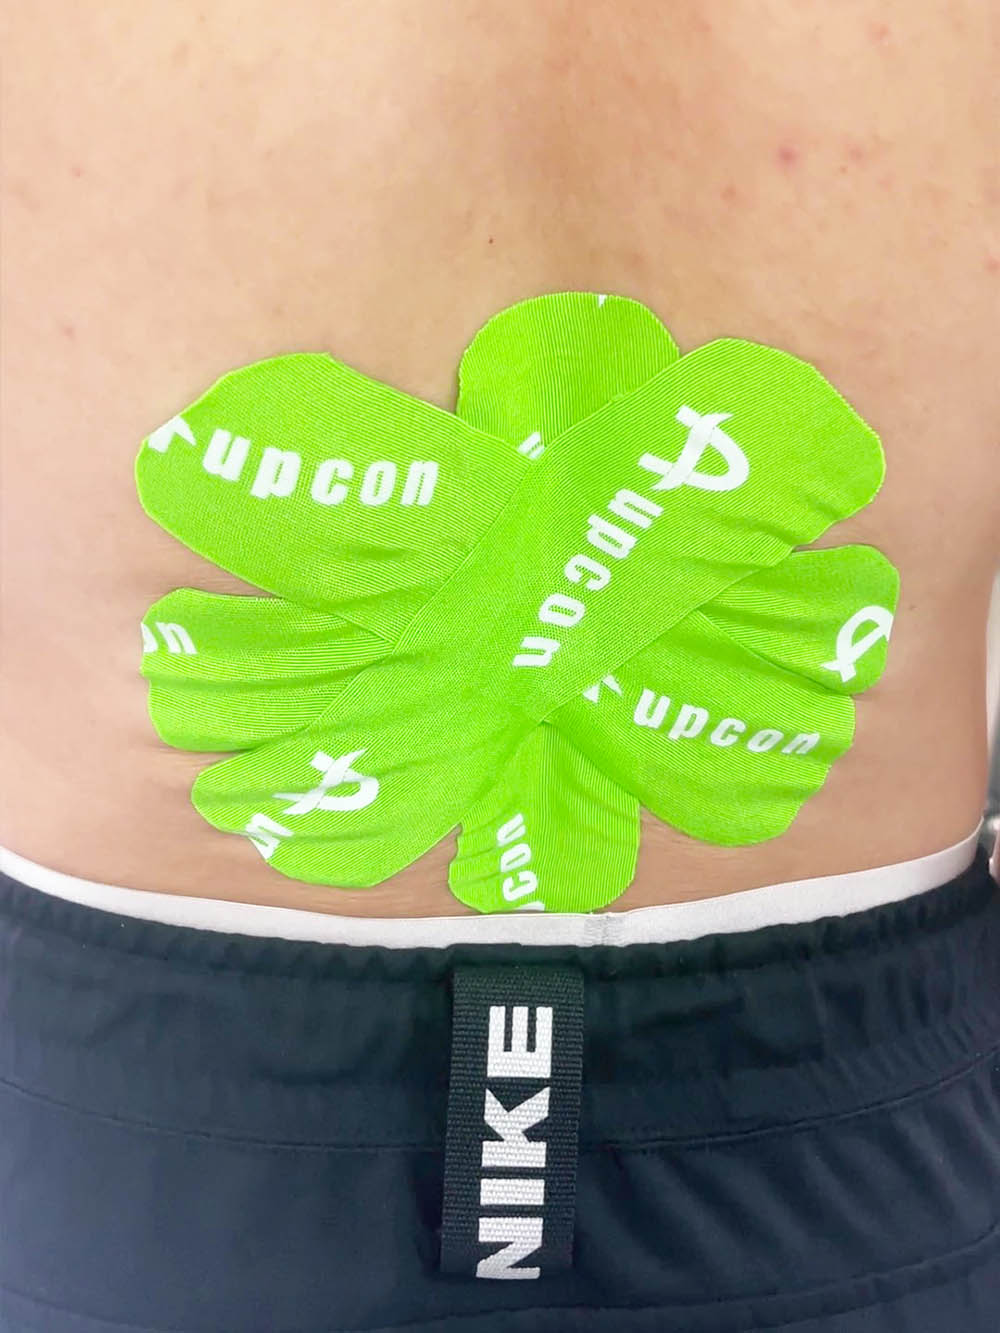 How to use shoulder kinesiology tape